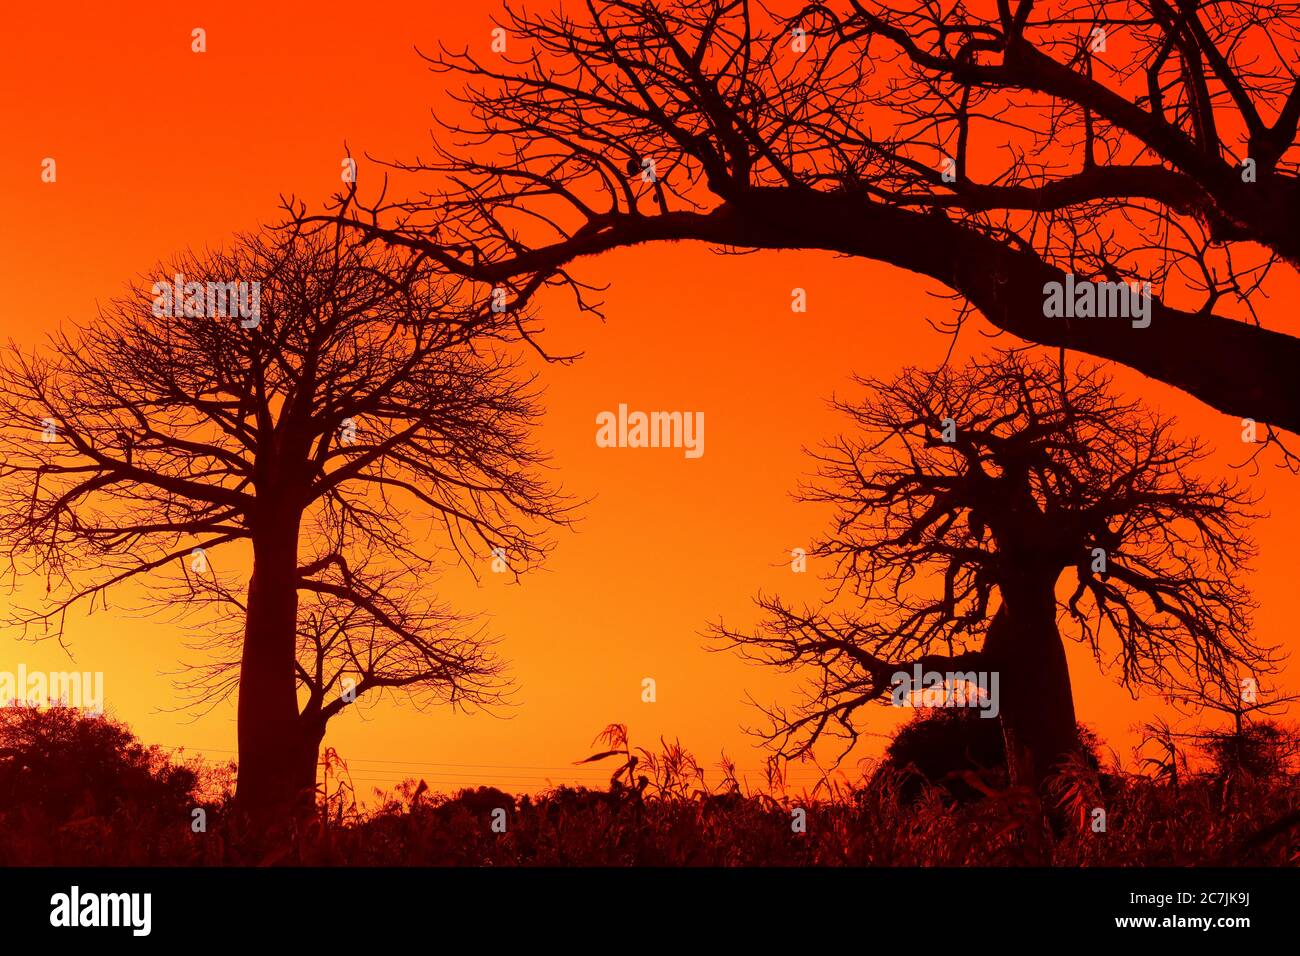 African baobab, aka Adansonia digitata sometimes known as the upside down tree, Vilanculos, Mozambique, Mozambique, East Africa, Africa Stock Photo